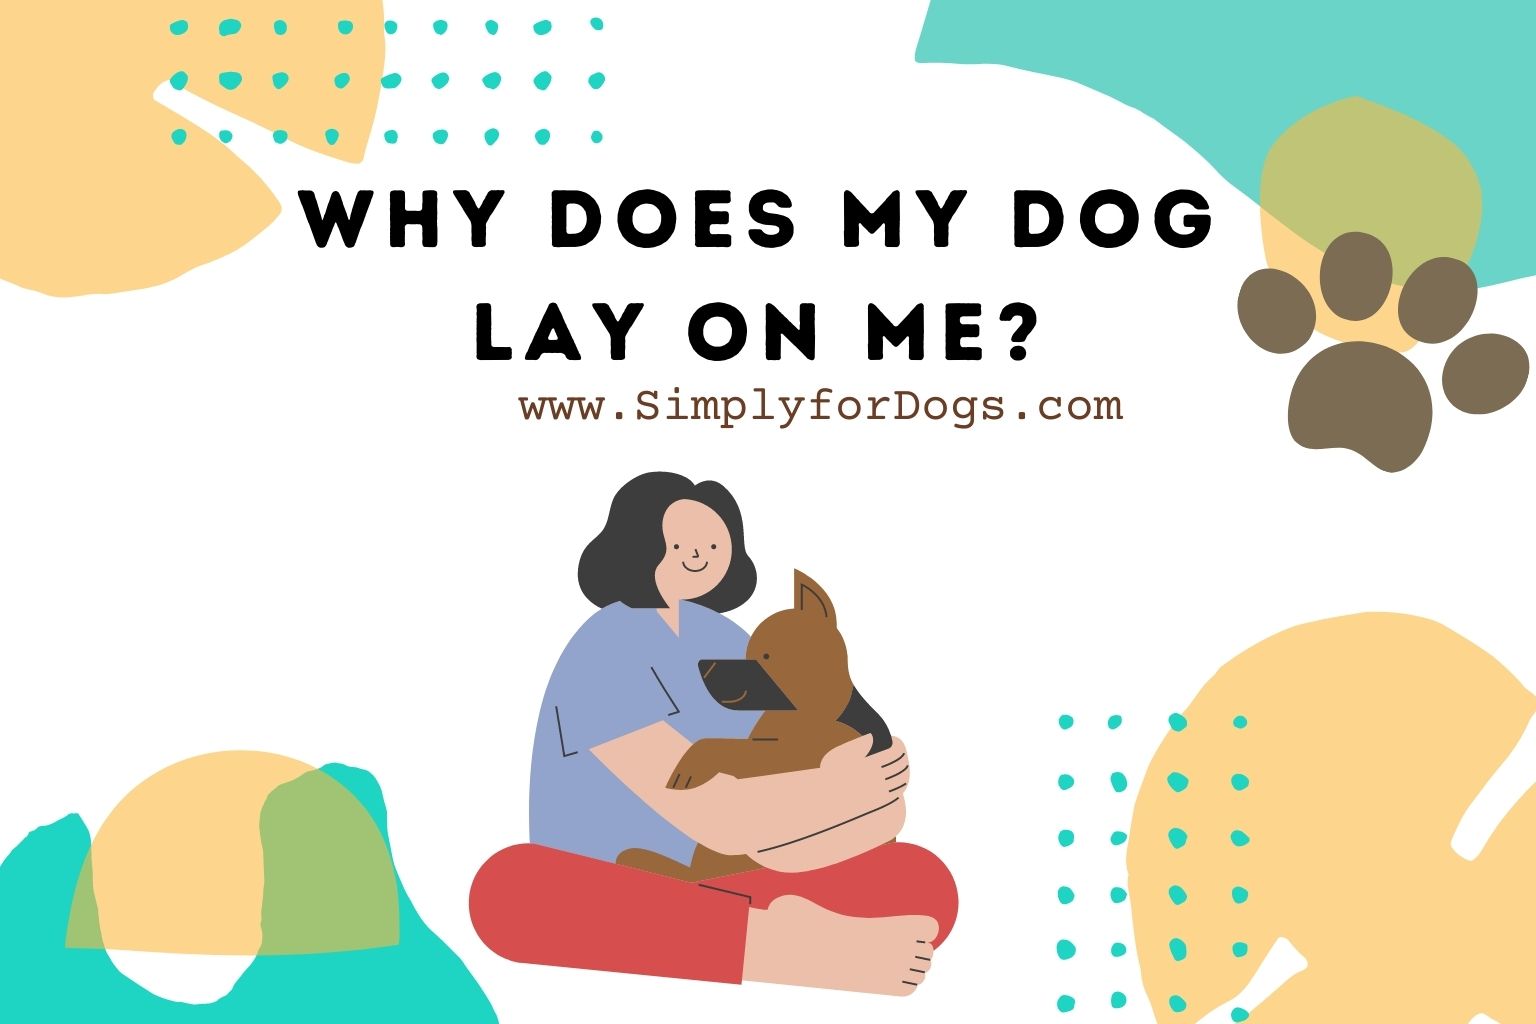 Why Does My Dog Lay On Me? (Reasons and Care) Simply For Dogs